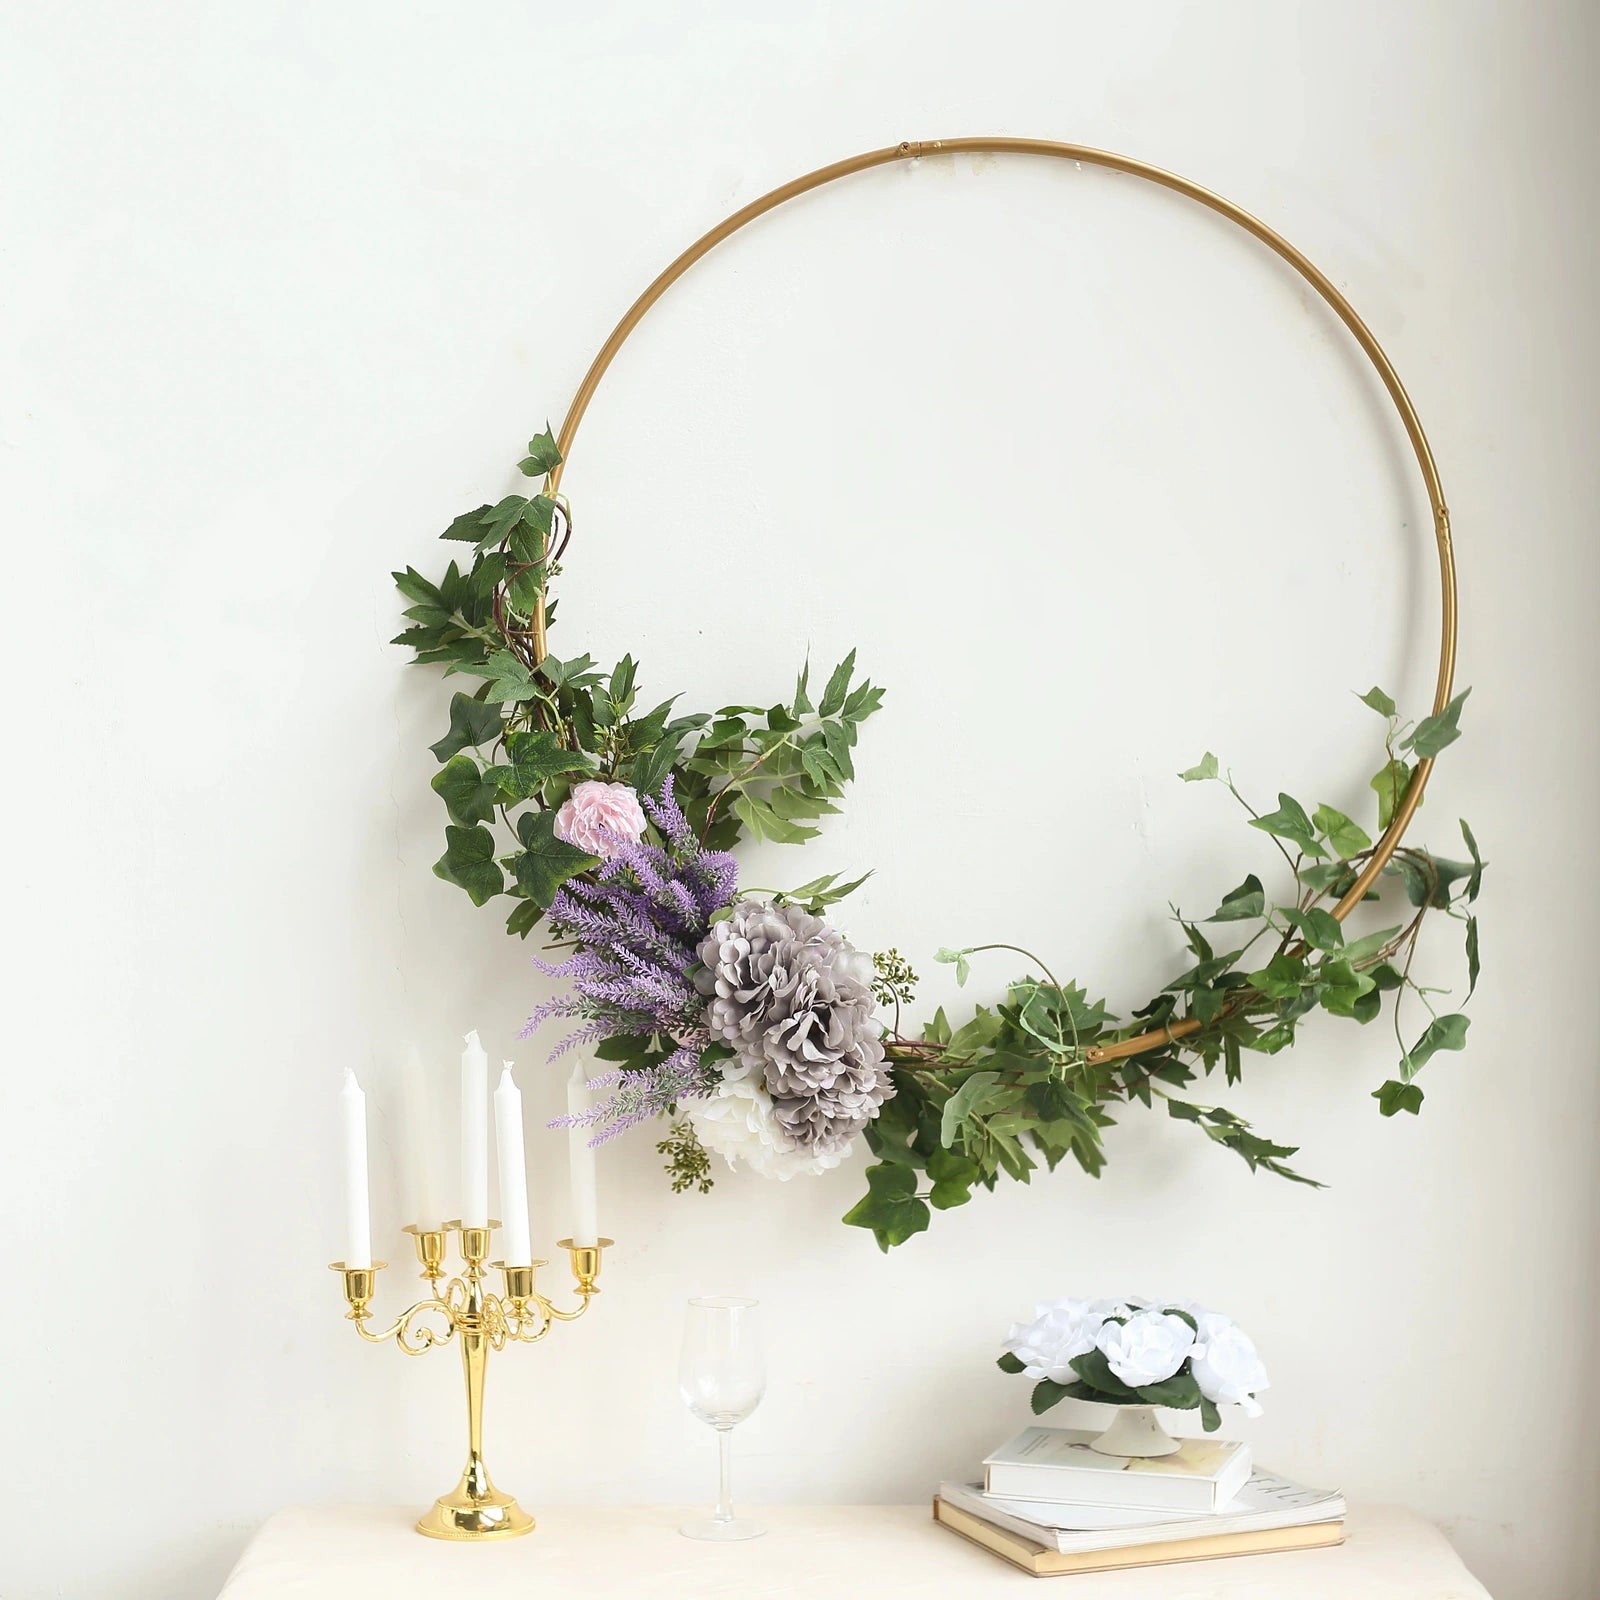 Heavy Duty Metal Hoop Wreath in Gold or Rose Gold varying sizes